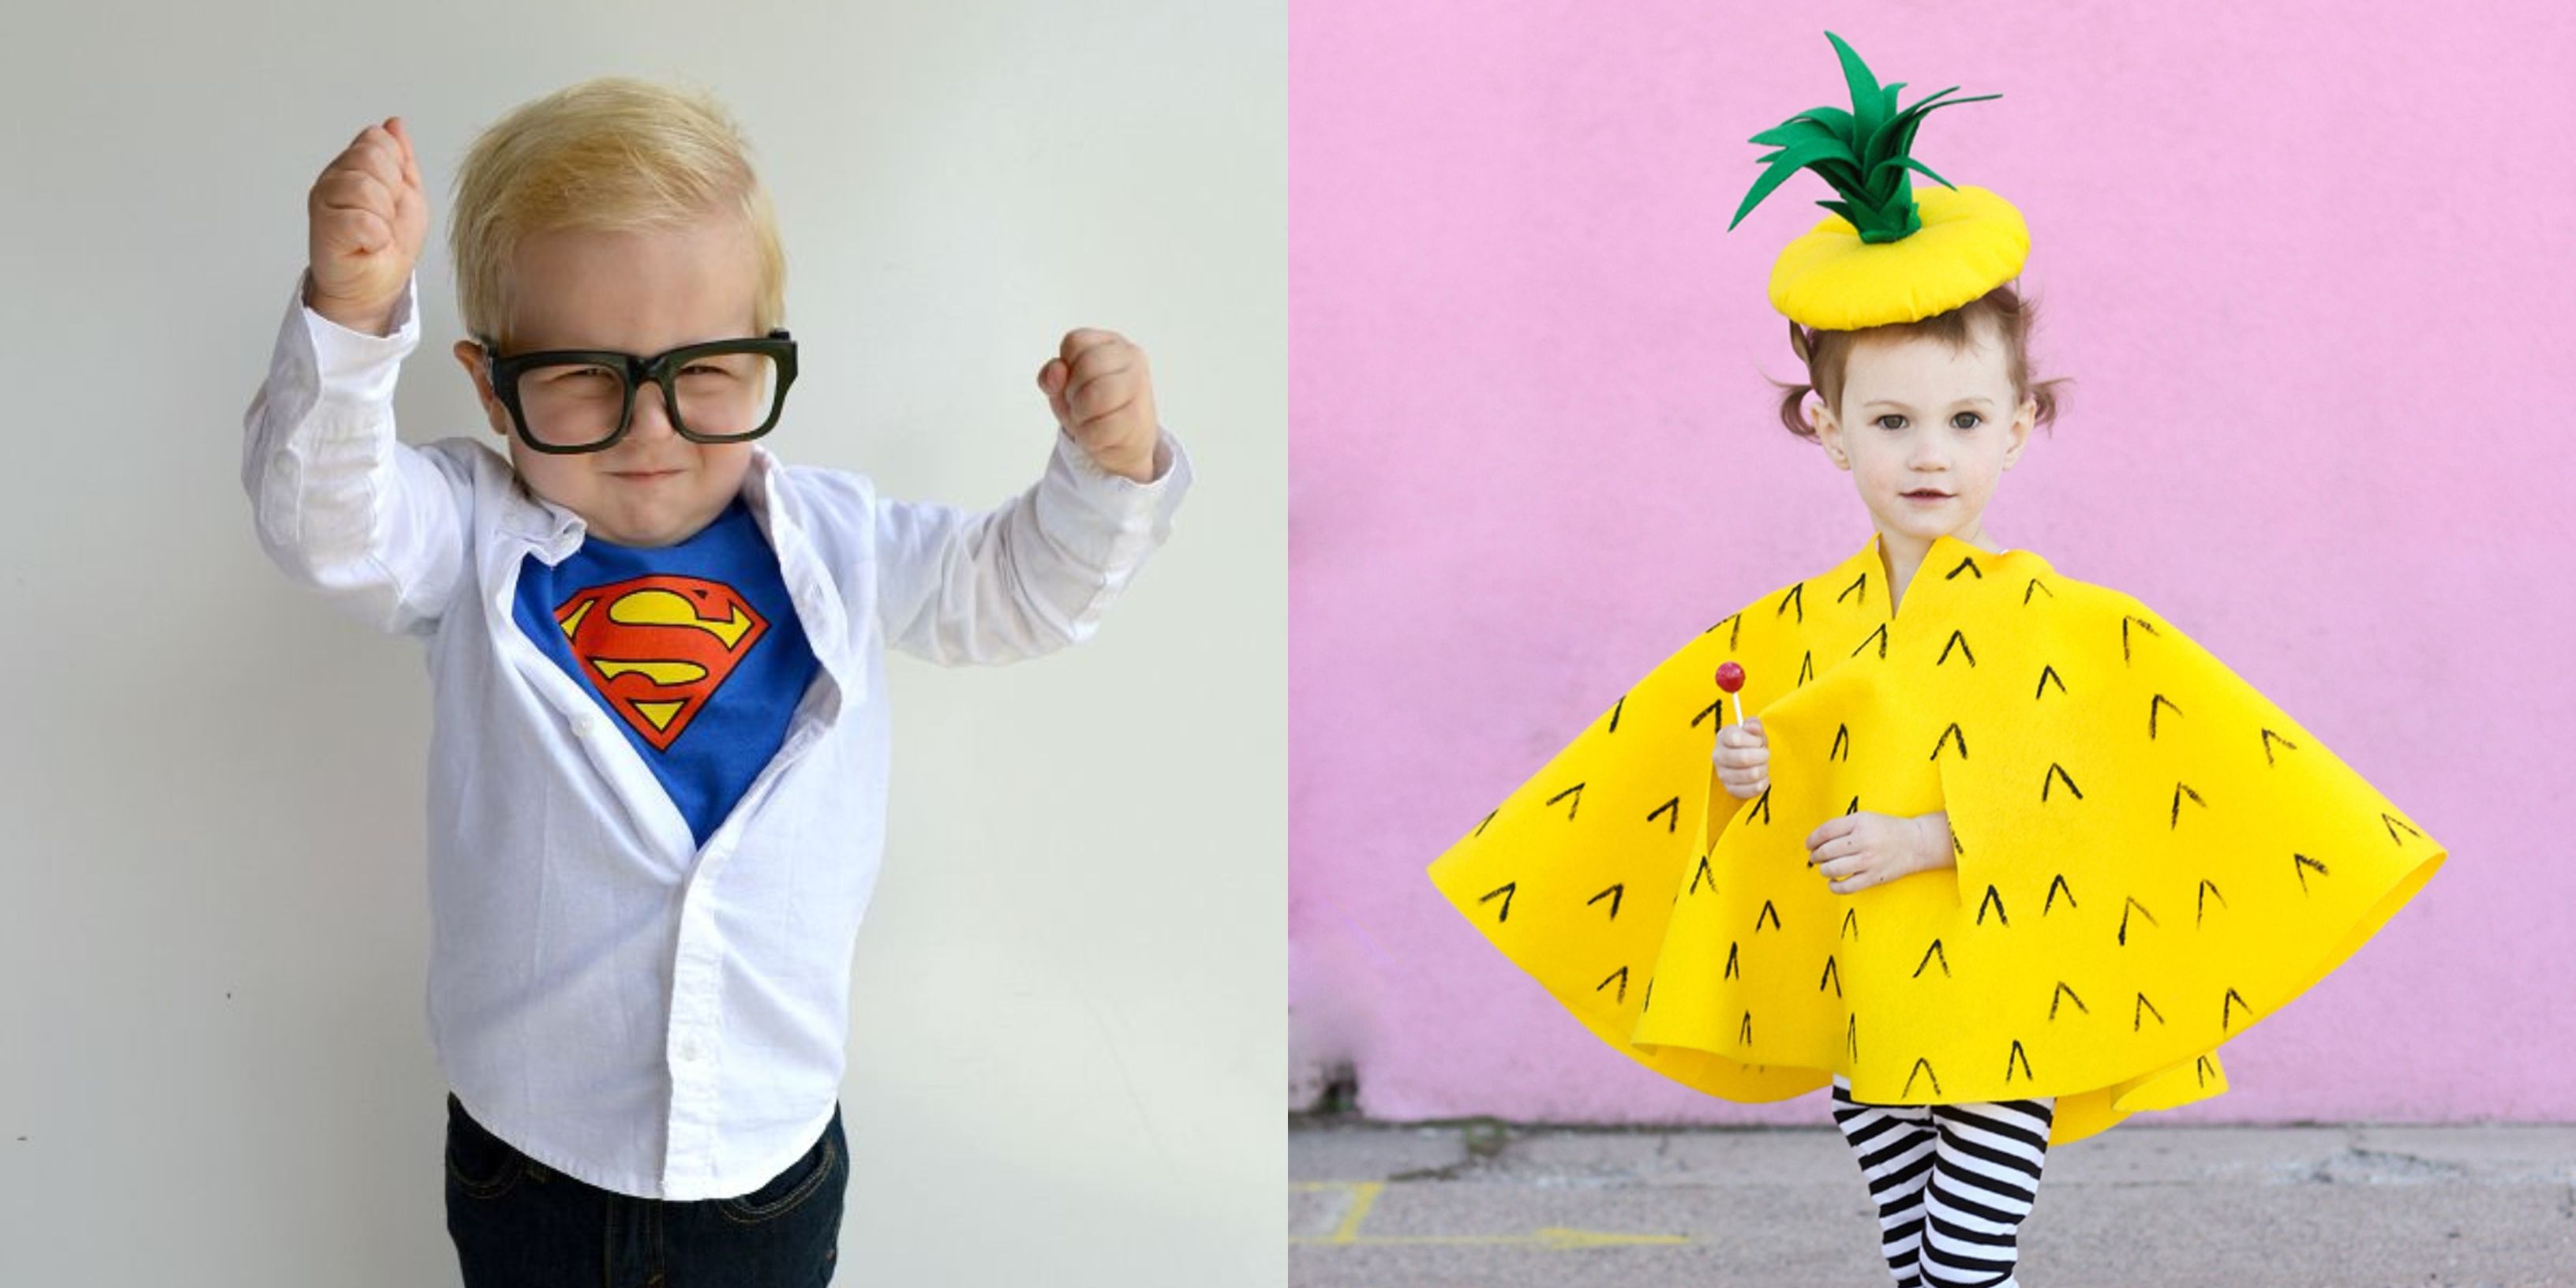 46 Cute Toddler Halloween Costume Ideas 2022 - How to Make Toddler Boy and  Girl Costumes